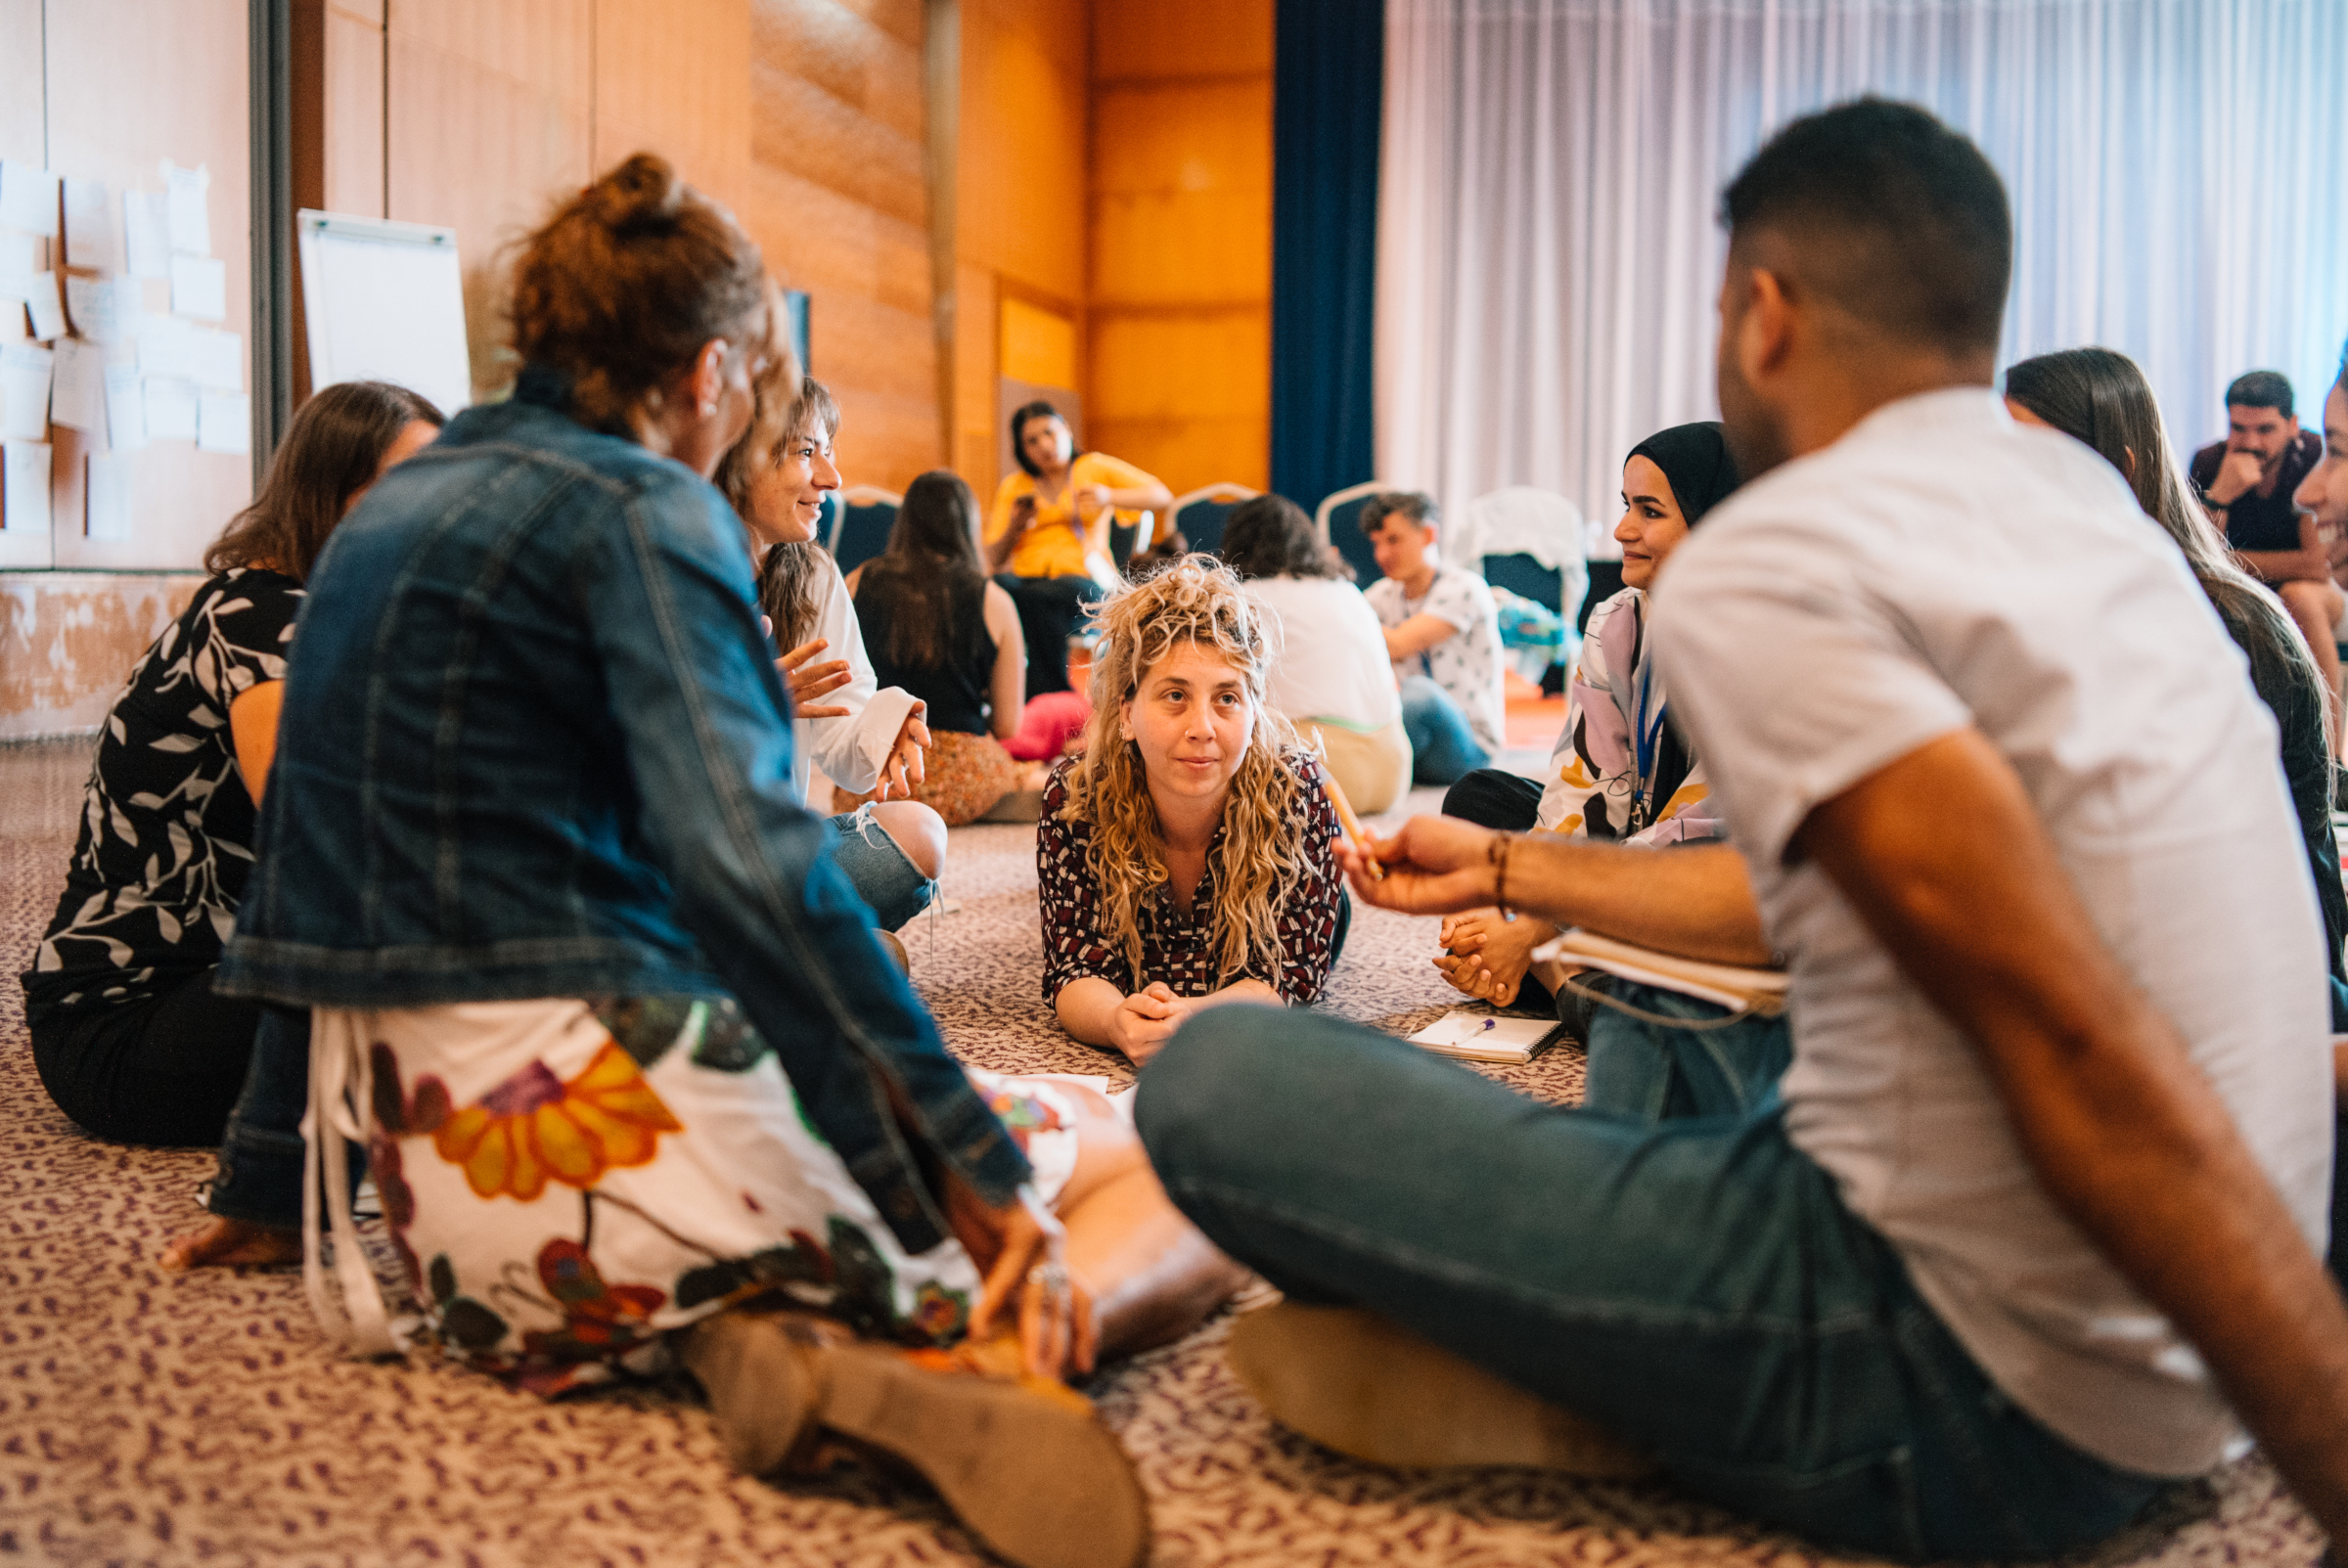 A group of young people sit on a floor and discuss